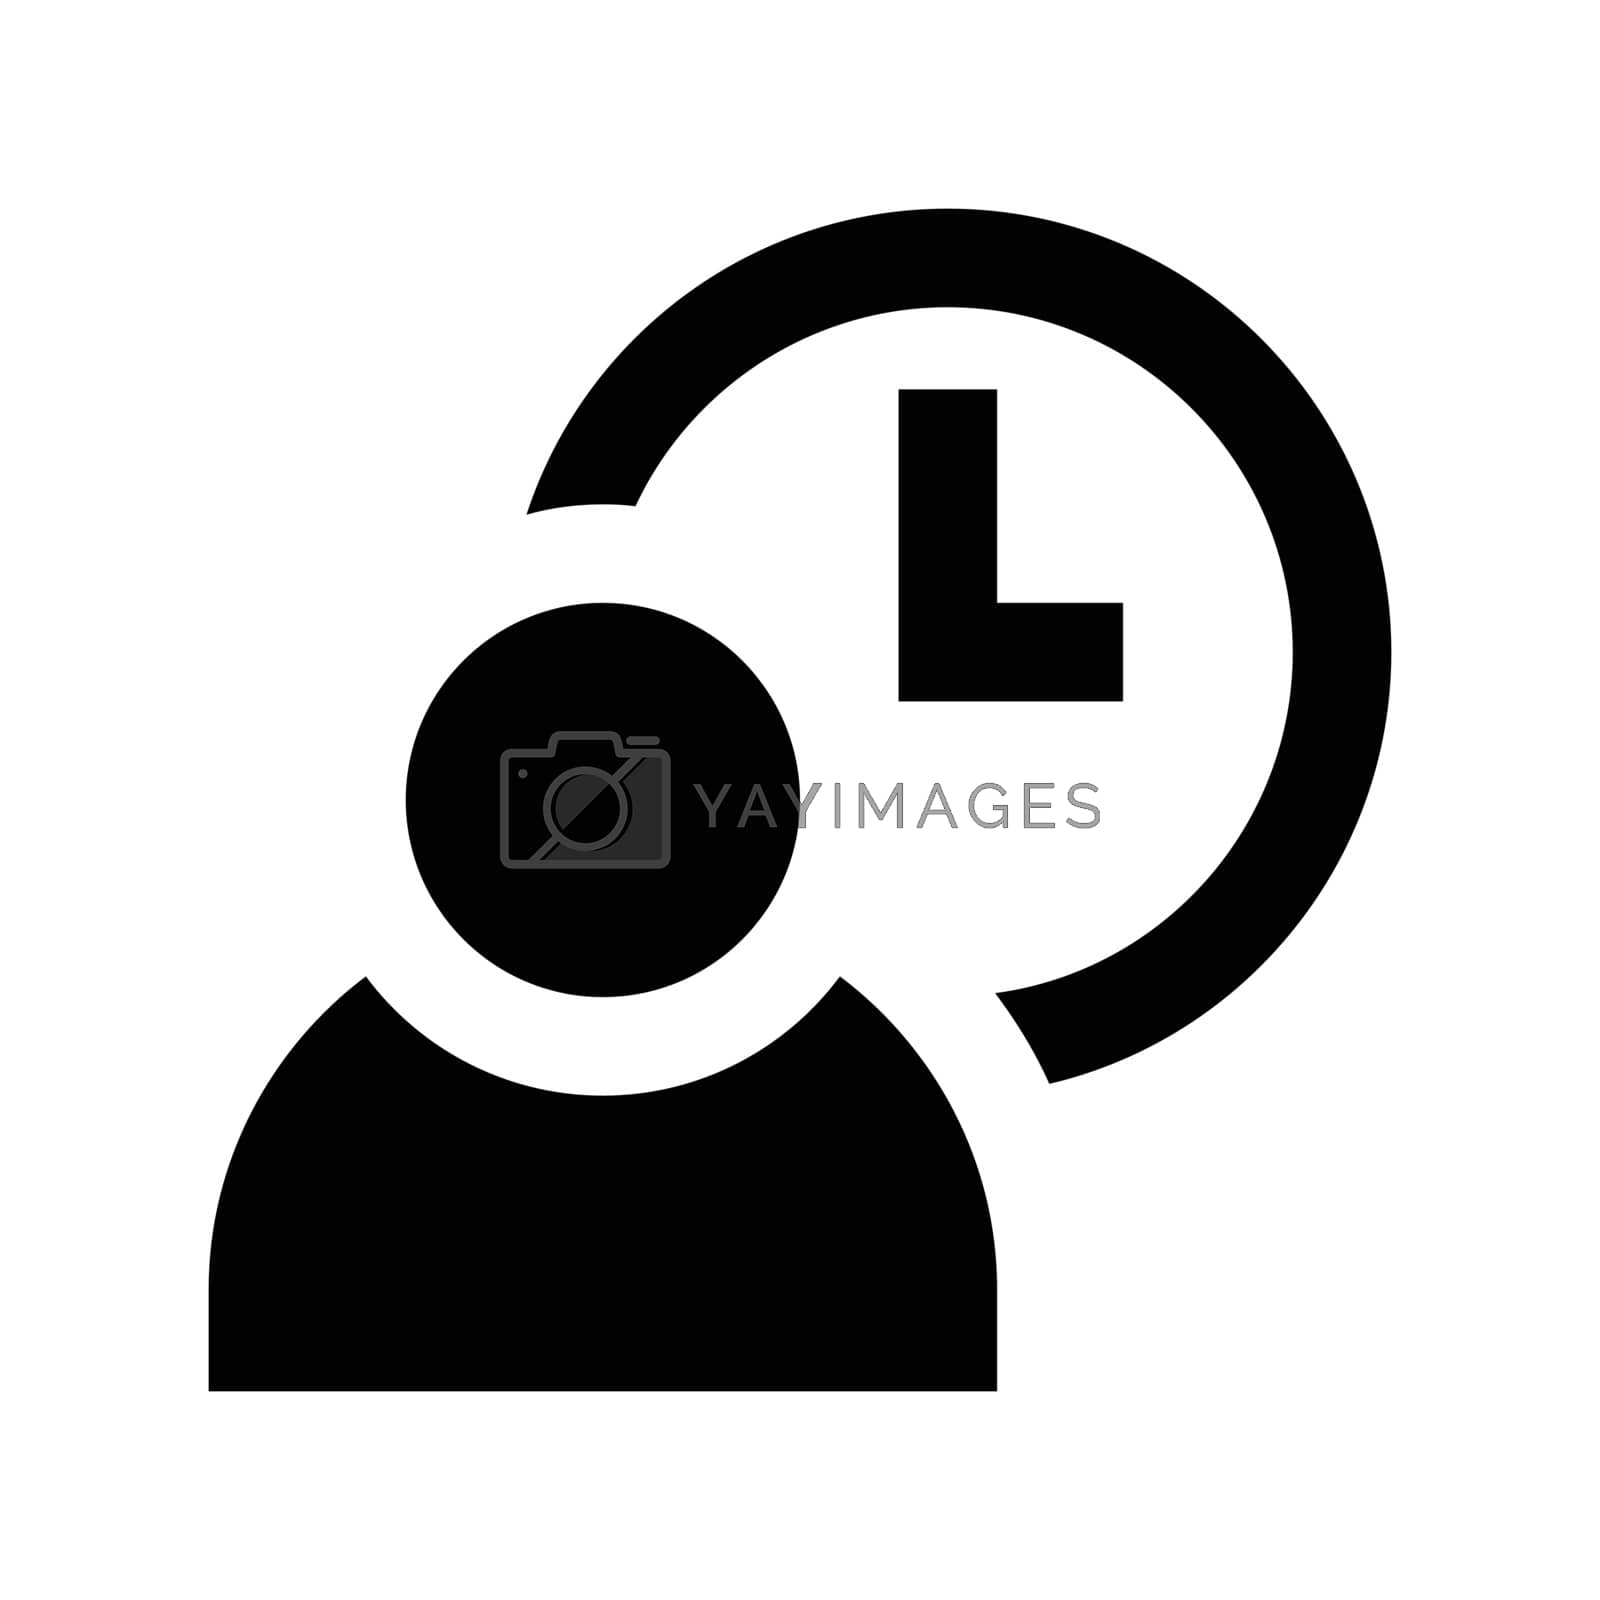 Royalty free image of user by vectorstall